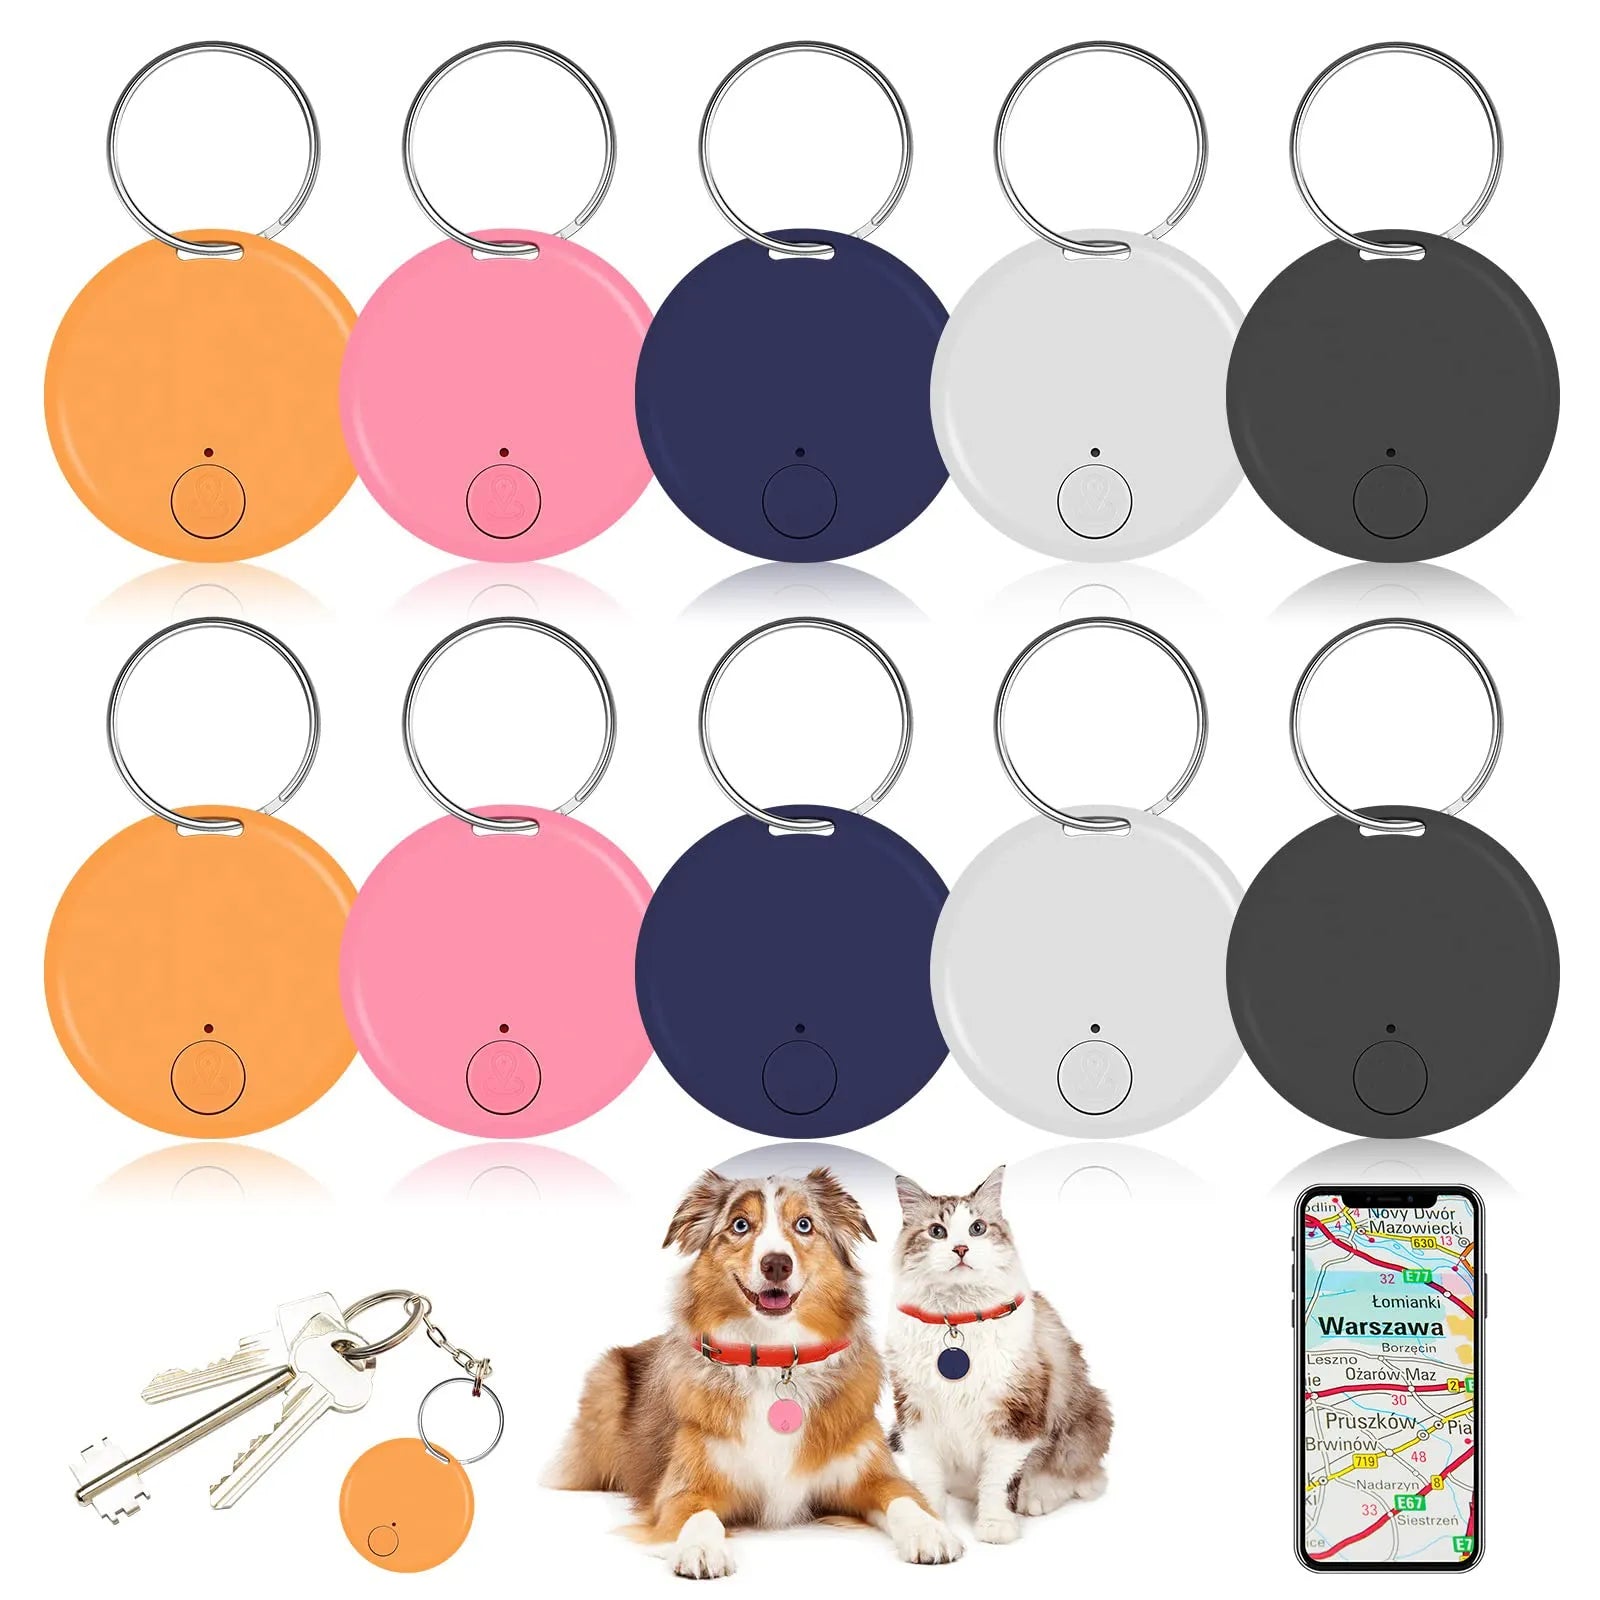 Mini GPS Tracker Bluetooth Anti-Lost Device Pet Portable Kids Wallet Tracking for IOS/ Android Smart Finder Locator Accessories